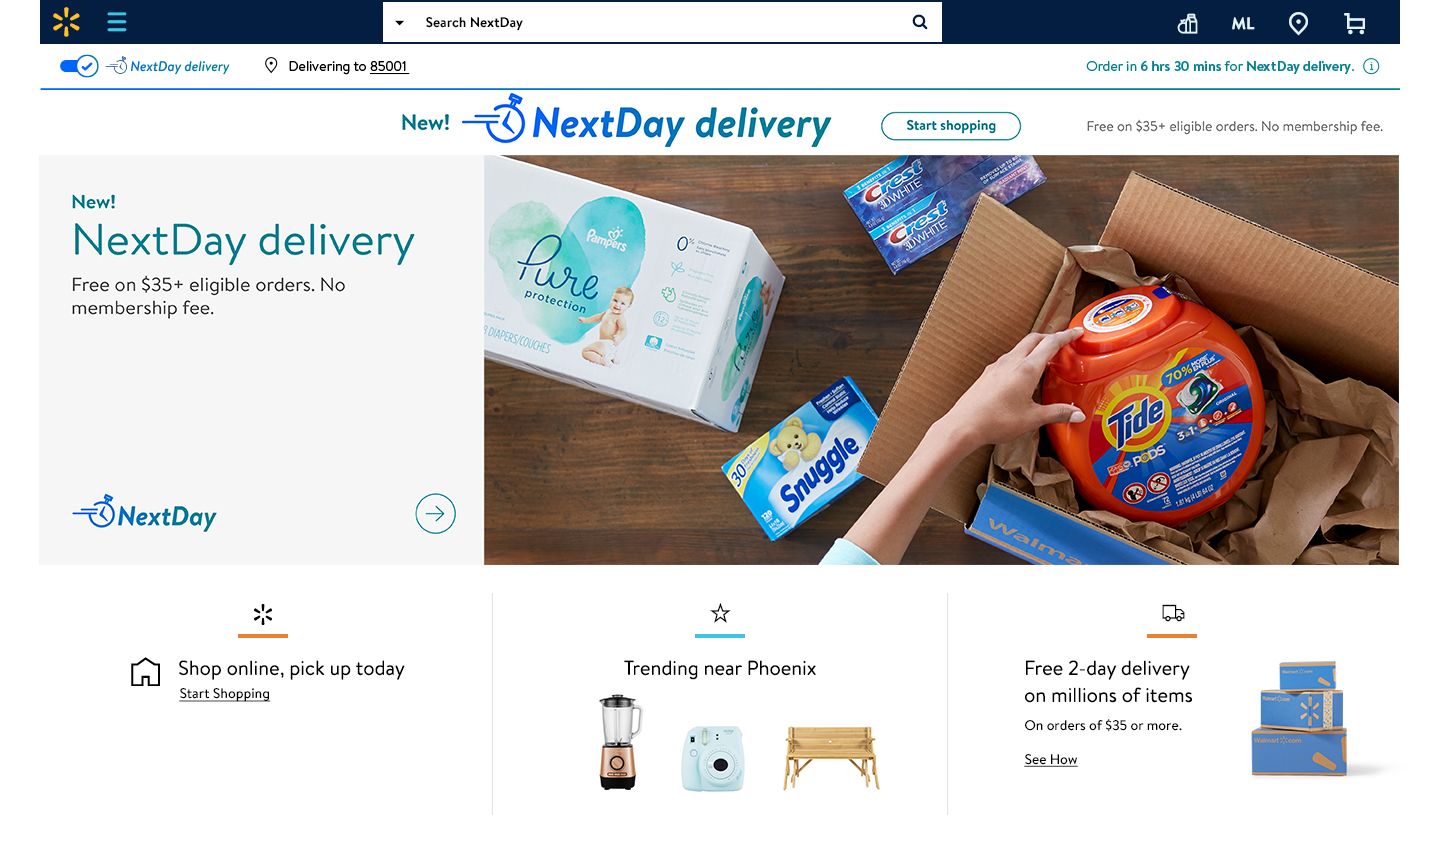 Walmart announces next-day delivery, firing back at Amazon